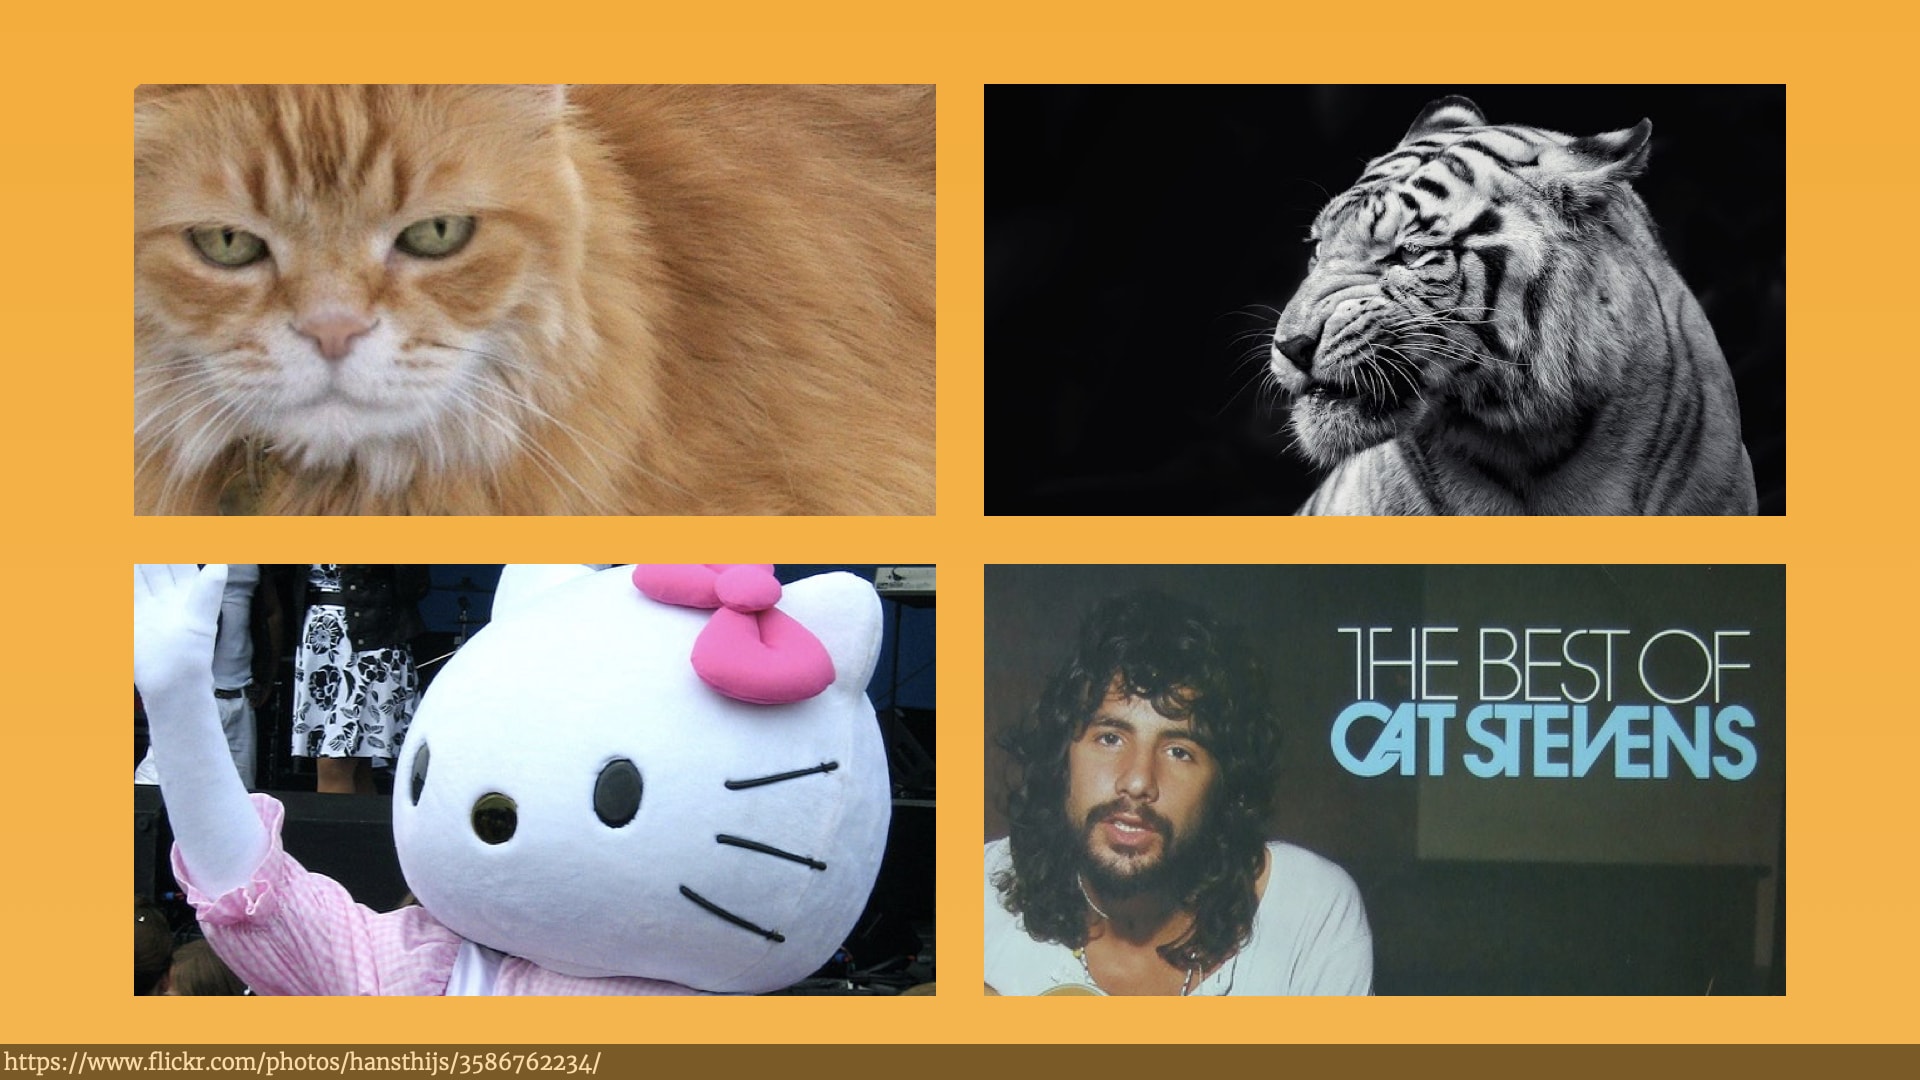 The photos of a ginger house cat, a tiger, and somebody dressed up as Hello Kitty are joined by a photo of the the album 'The Best of Cat Stevens' which includes a headshot of the singer.